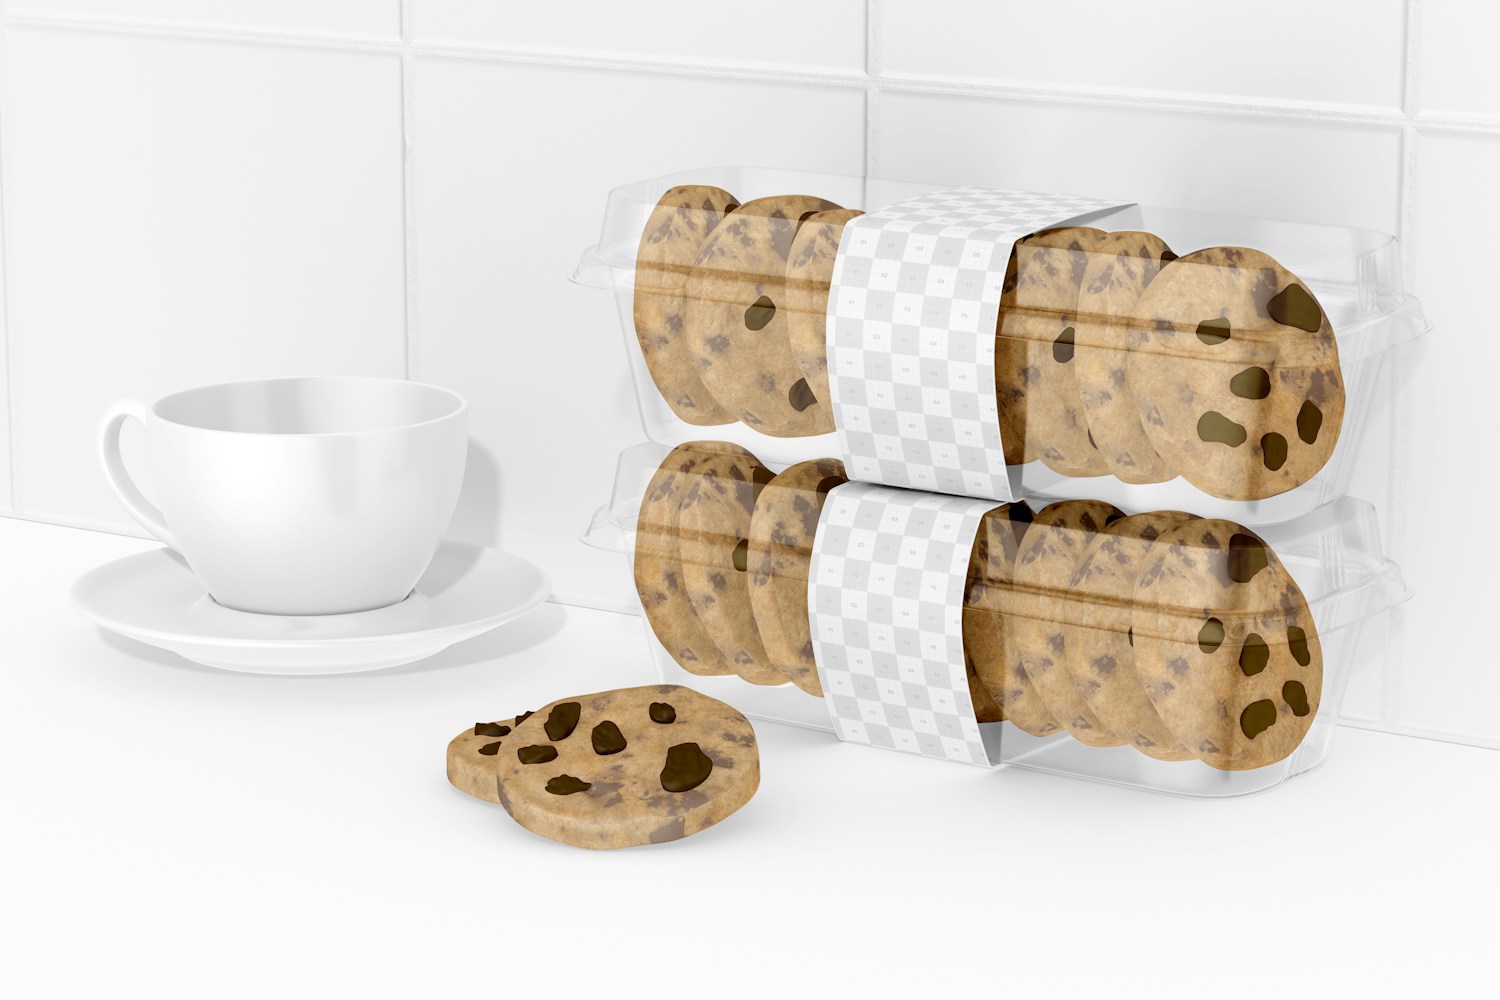 Plastic Cookie Boxes Mockup, Stacked